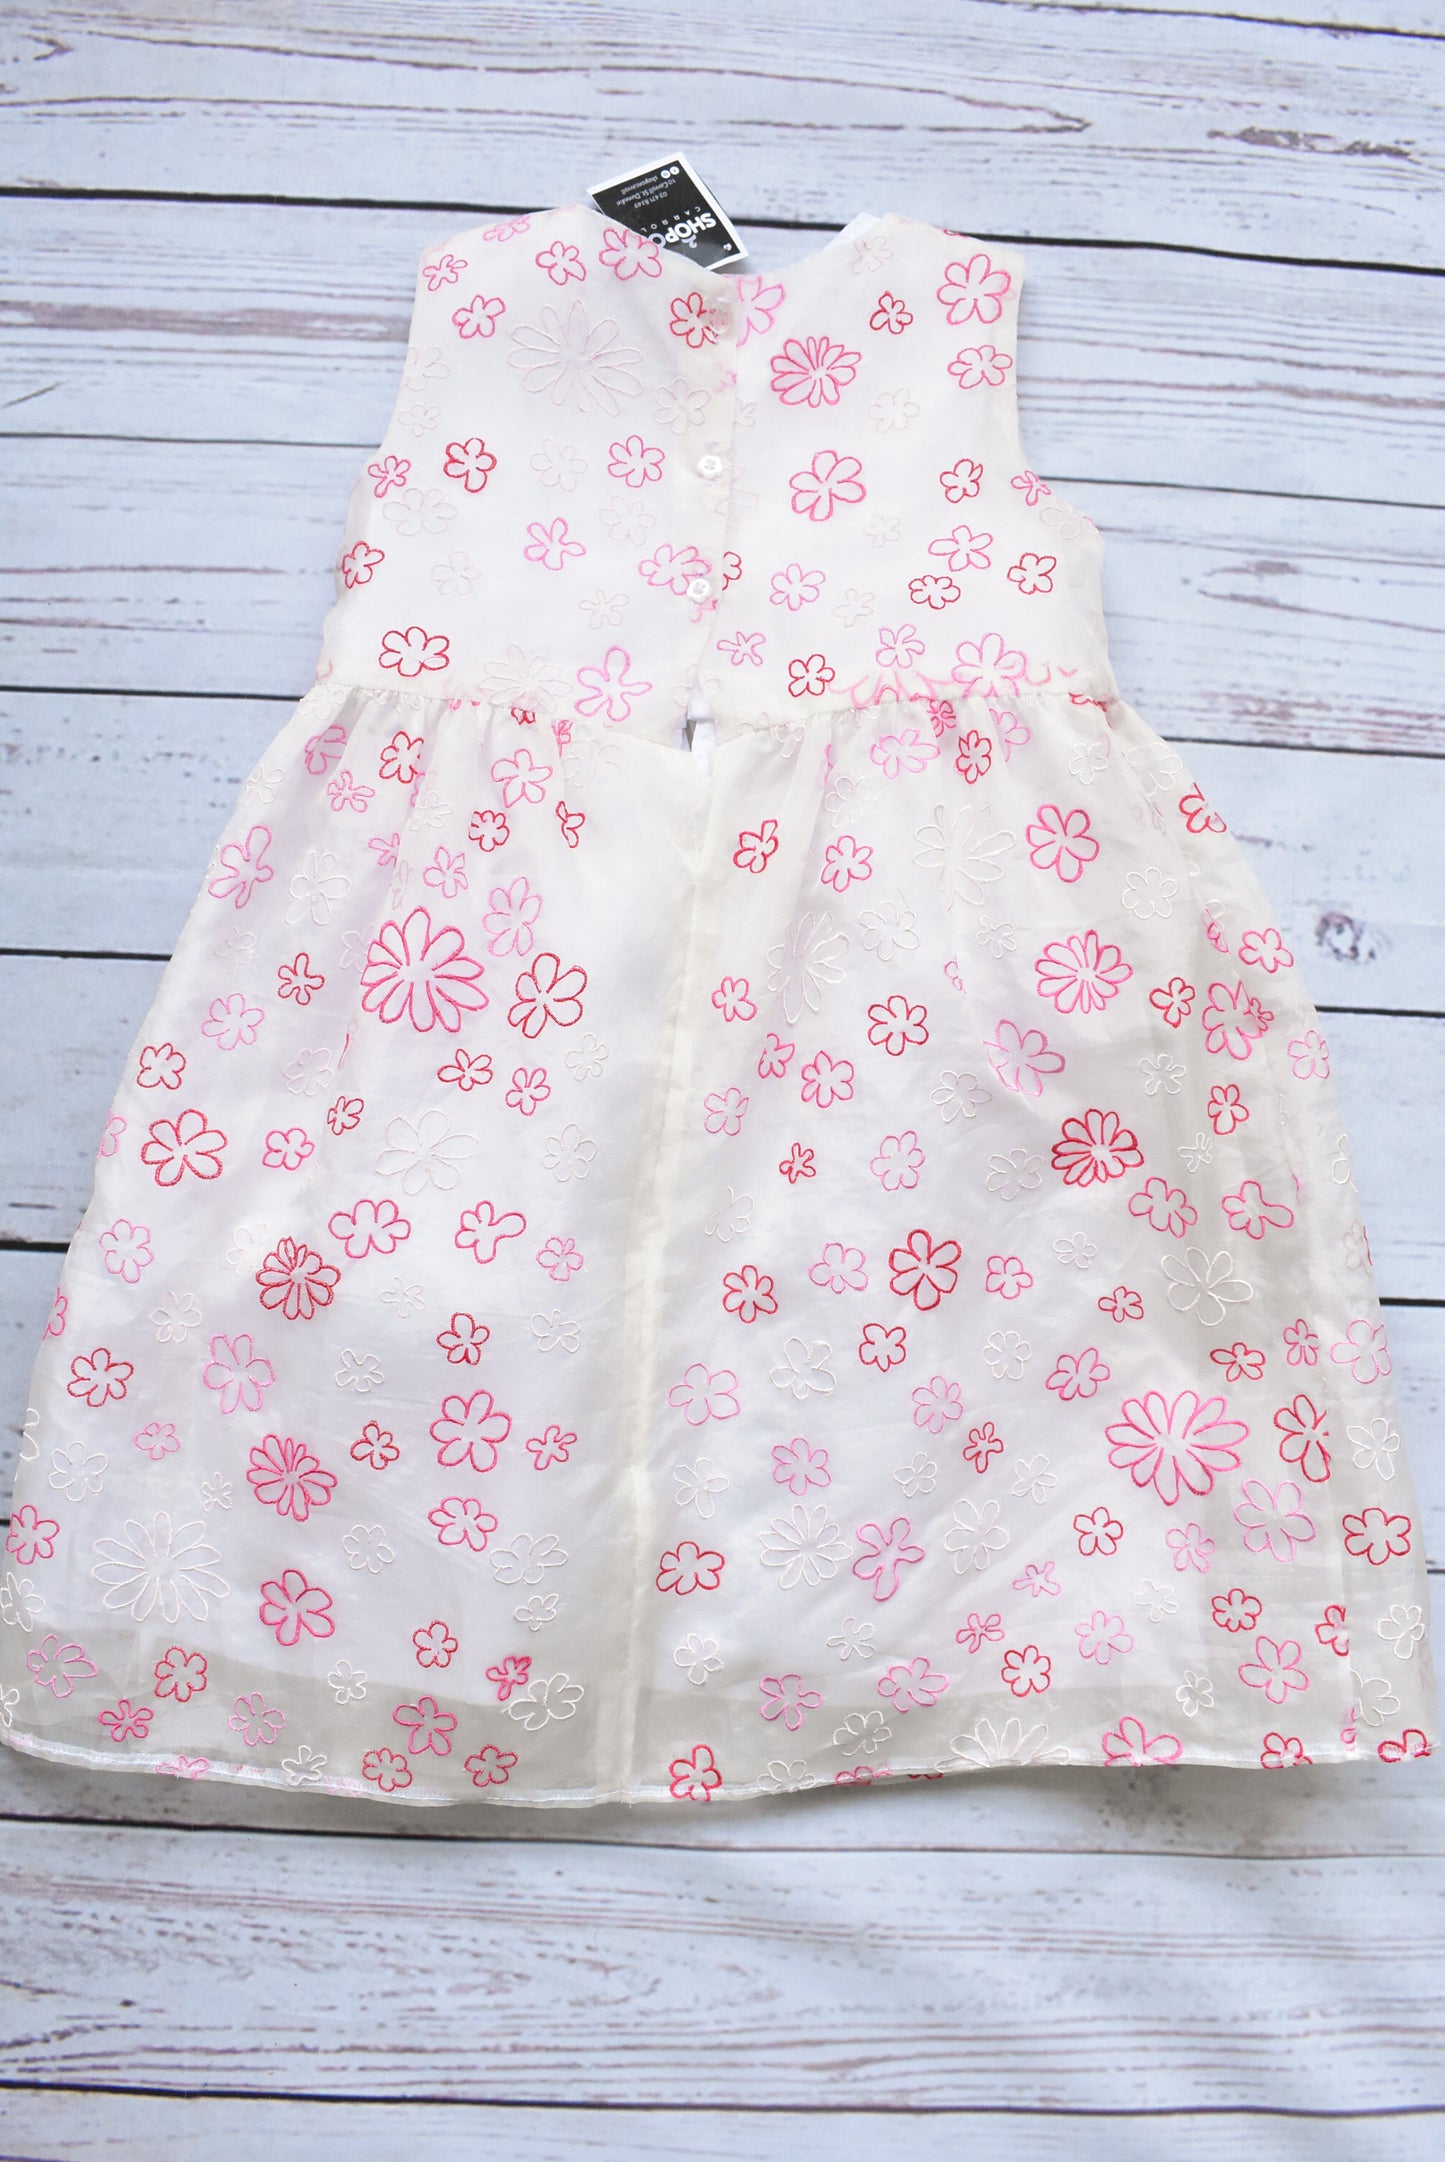 White and pink floral patterned kids dress